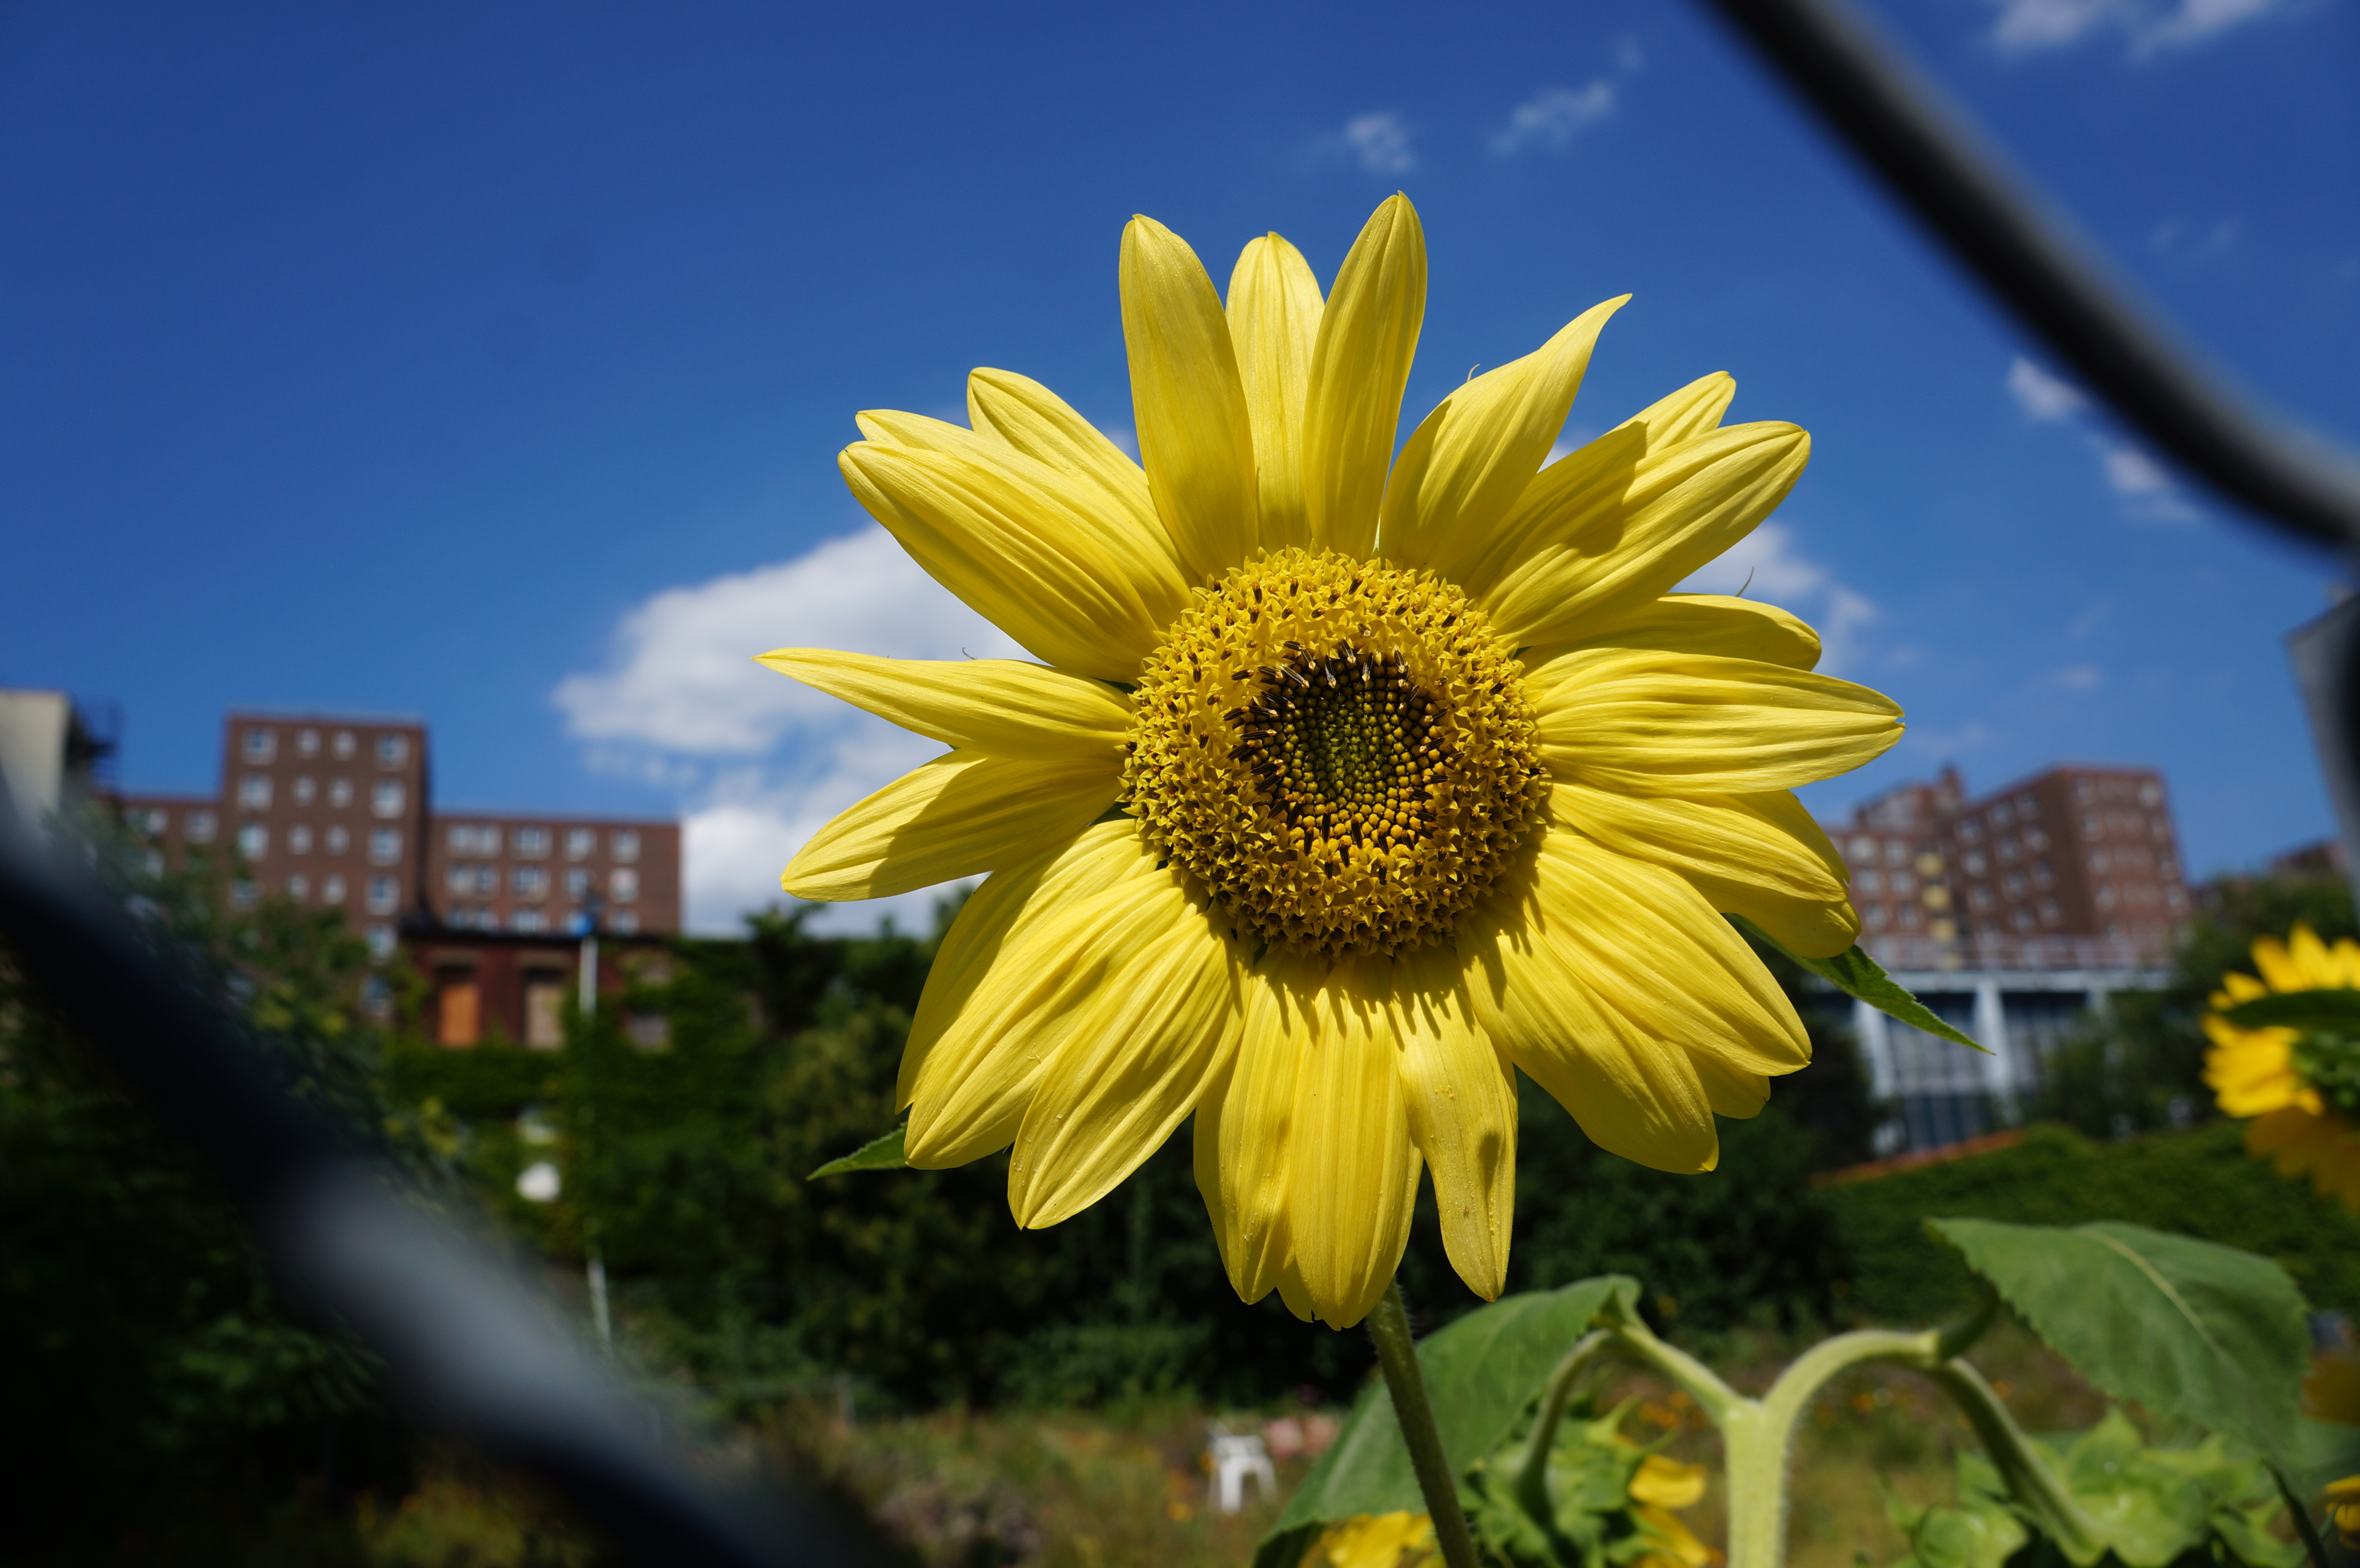 A sunflower grows behind the fence at Mandela Community Garden. Photo: Rebecca Baird-Remba/For Commercial Observer